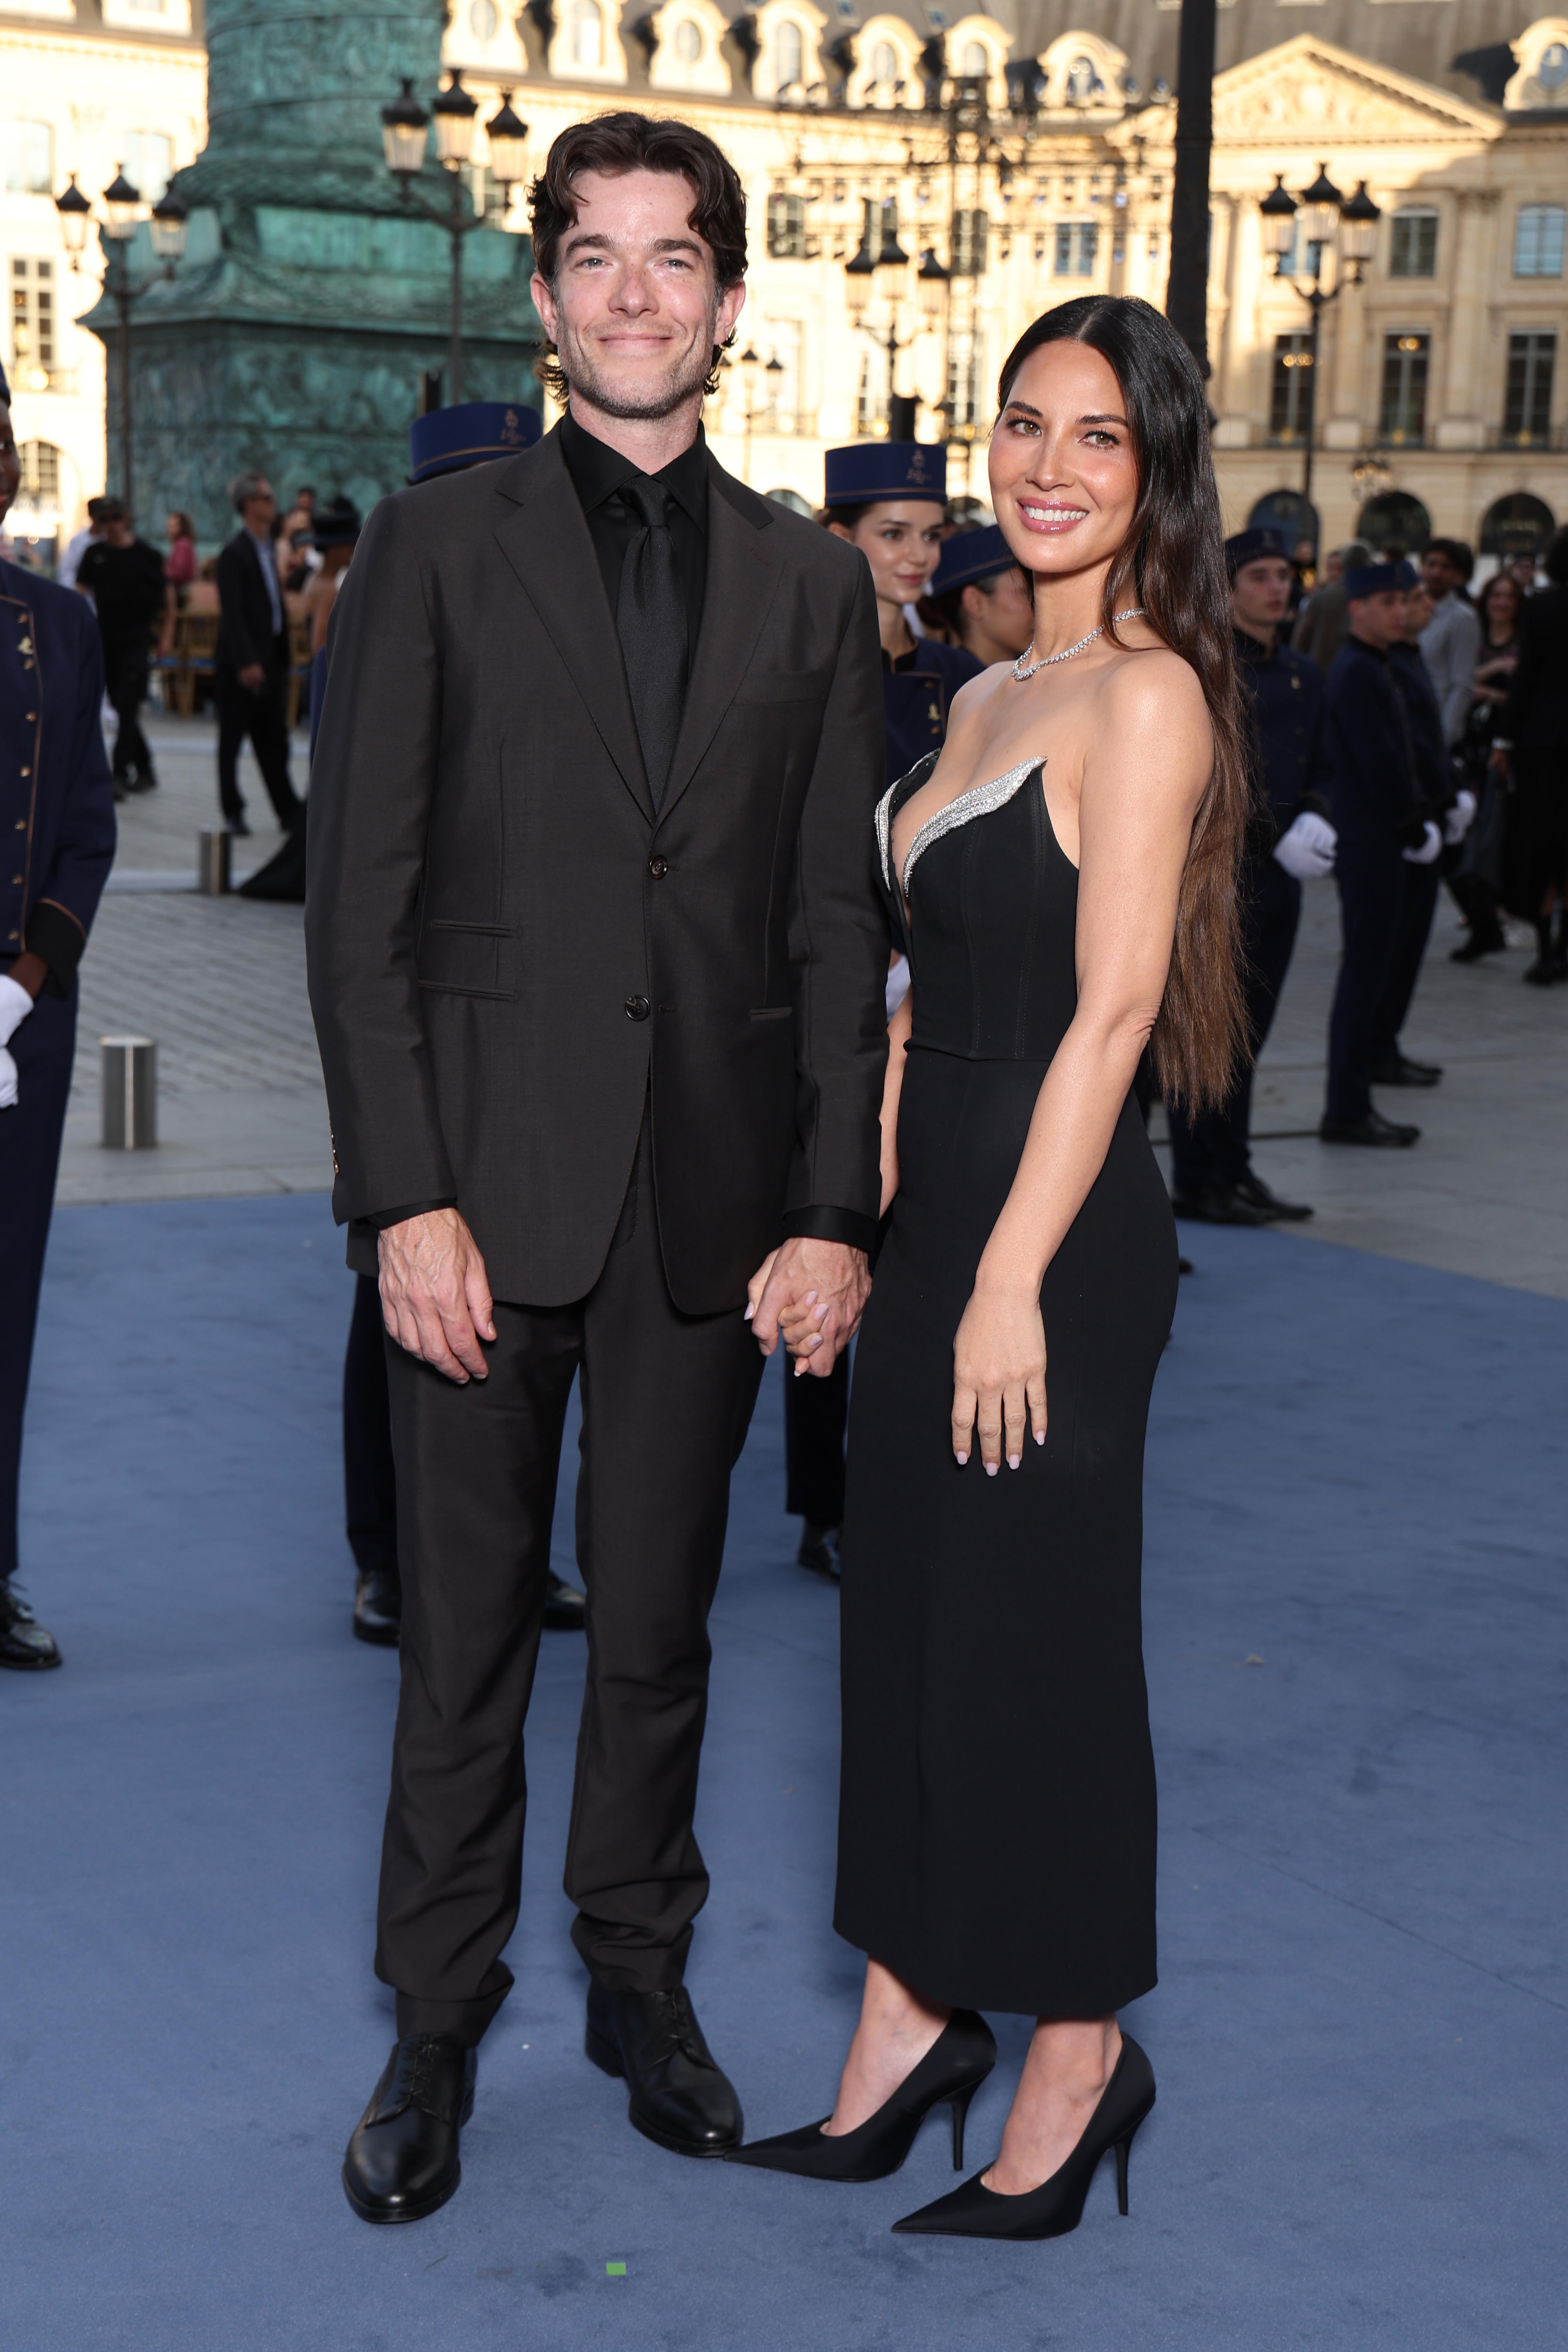 John Mulaney, in a black suit, and Olivia Munn, in a black dress and heels, smile for a photo.